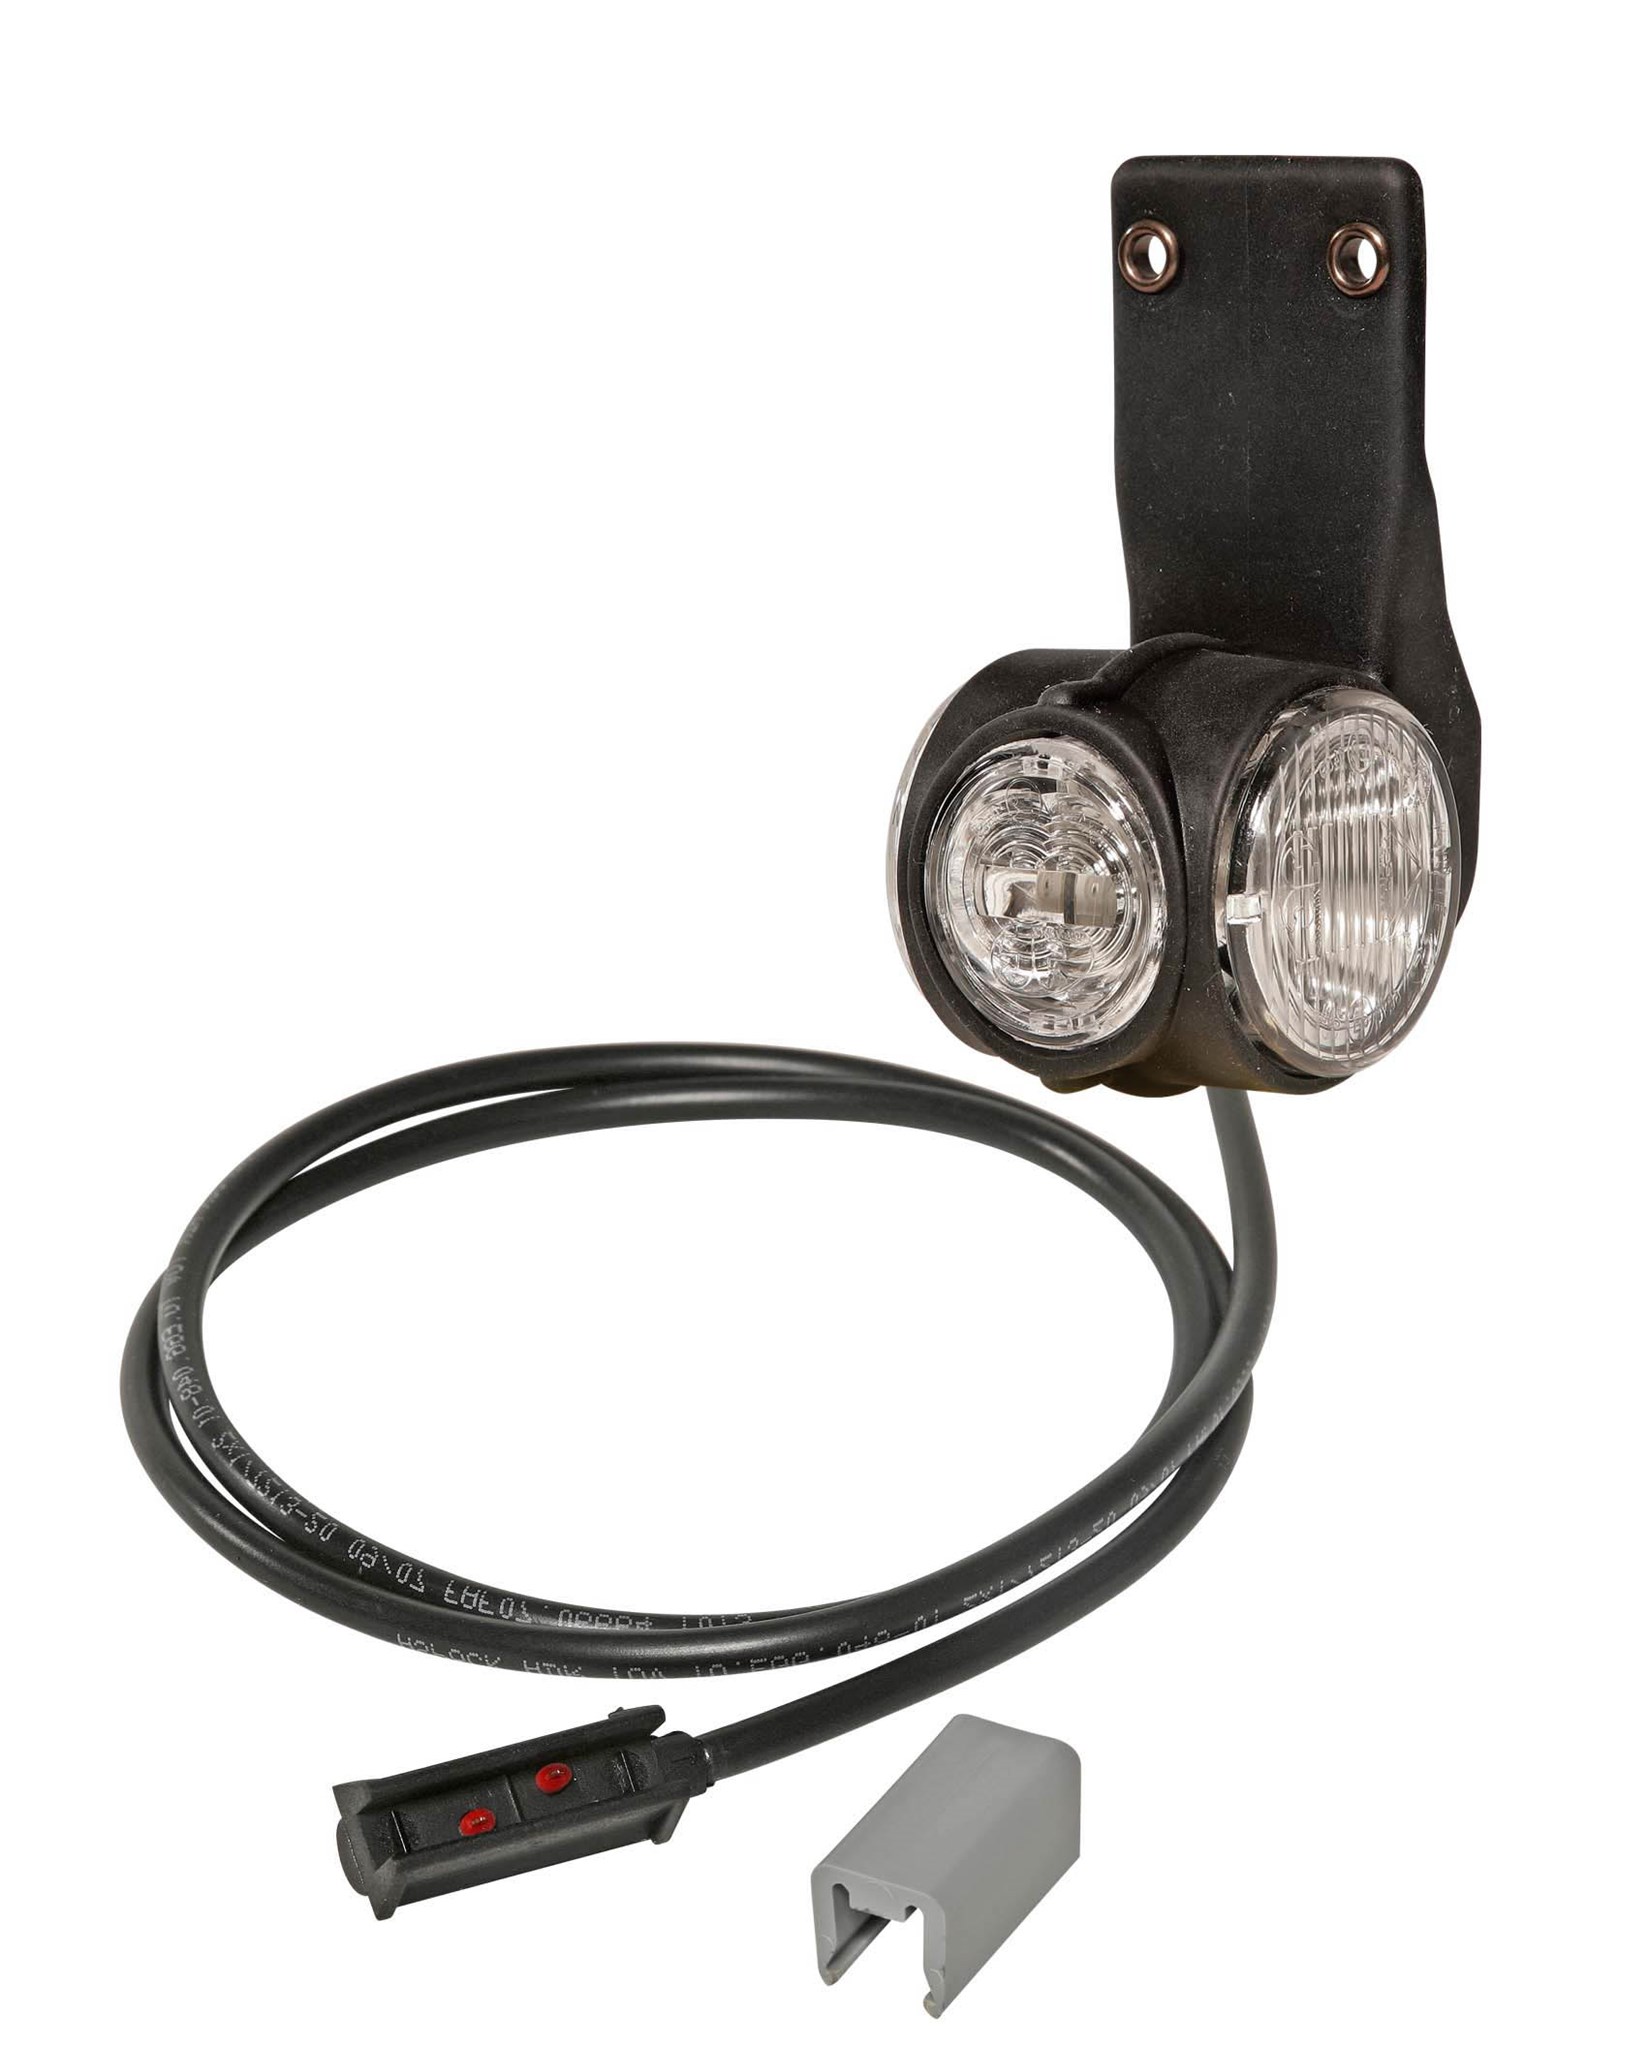 Immagine di 31-3364-027 Aspöck Superpoint III rechts, Pendelhalter P&R 1500mm ro/we/or, LED